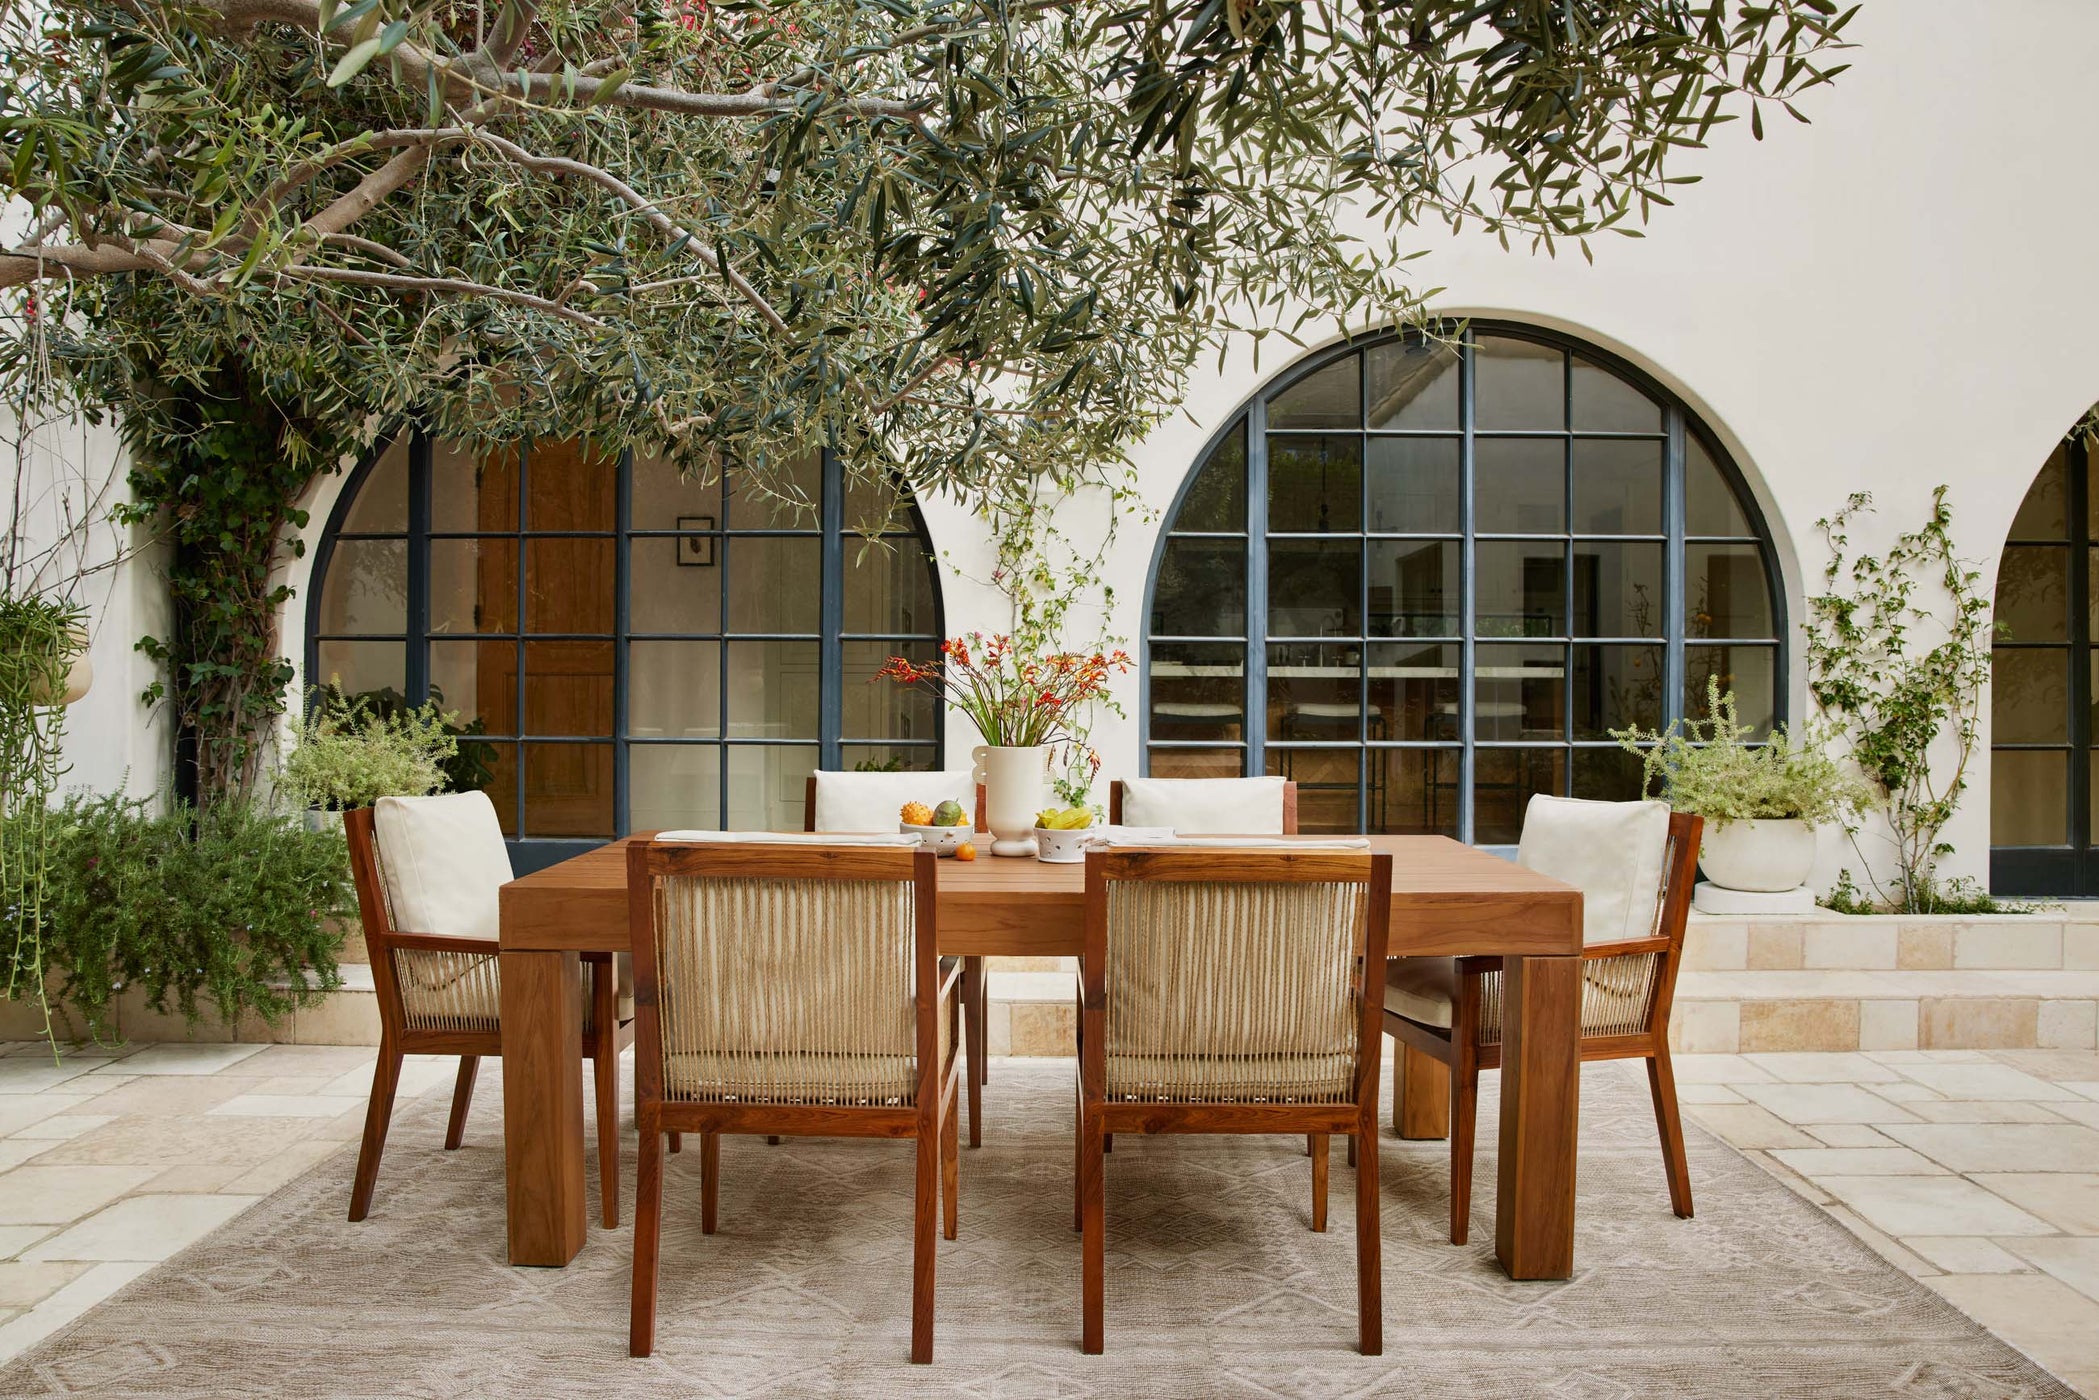 4 Ways To Prep Your Outdoor Space for Noon-to-Night Entertaining